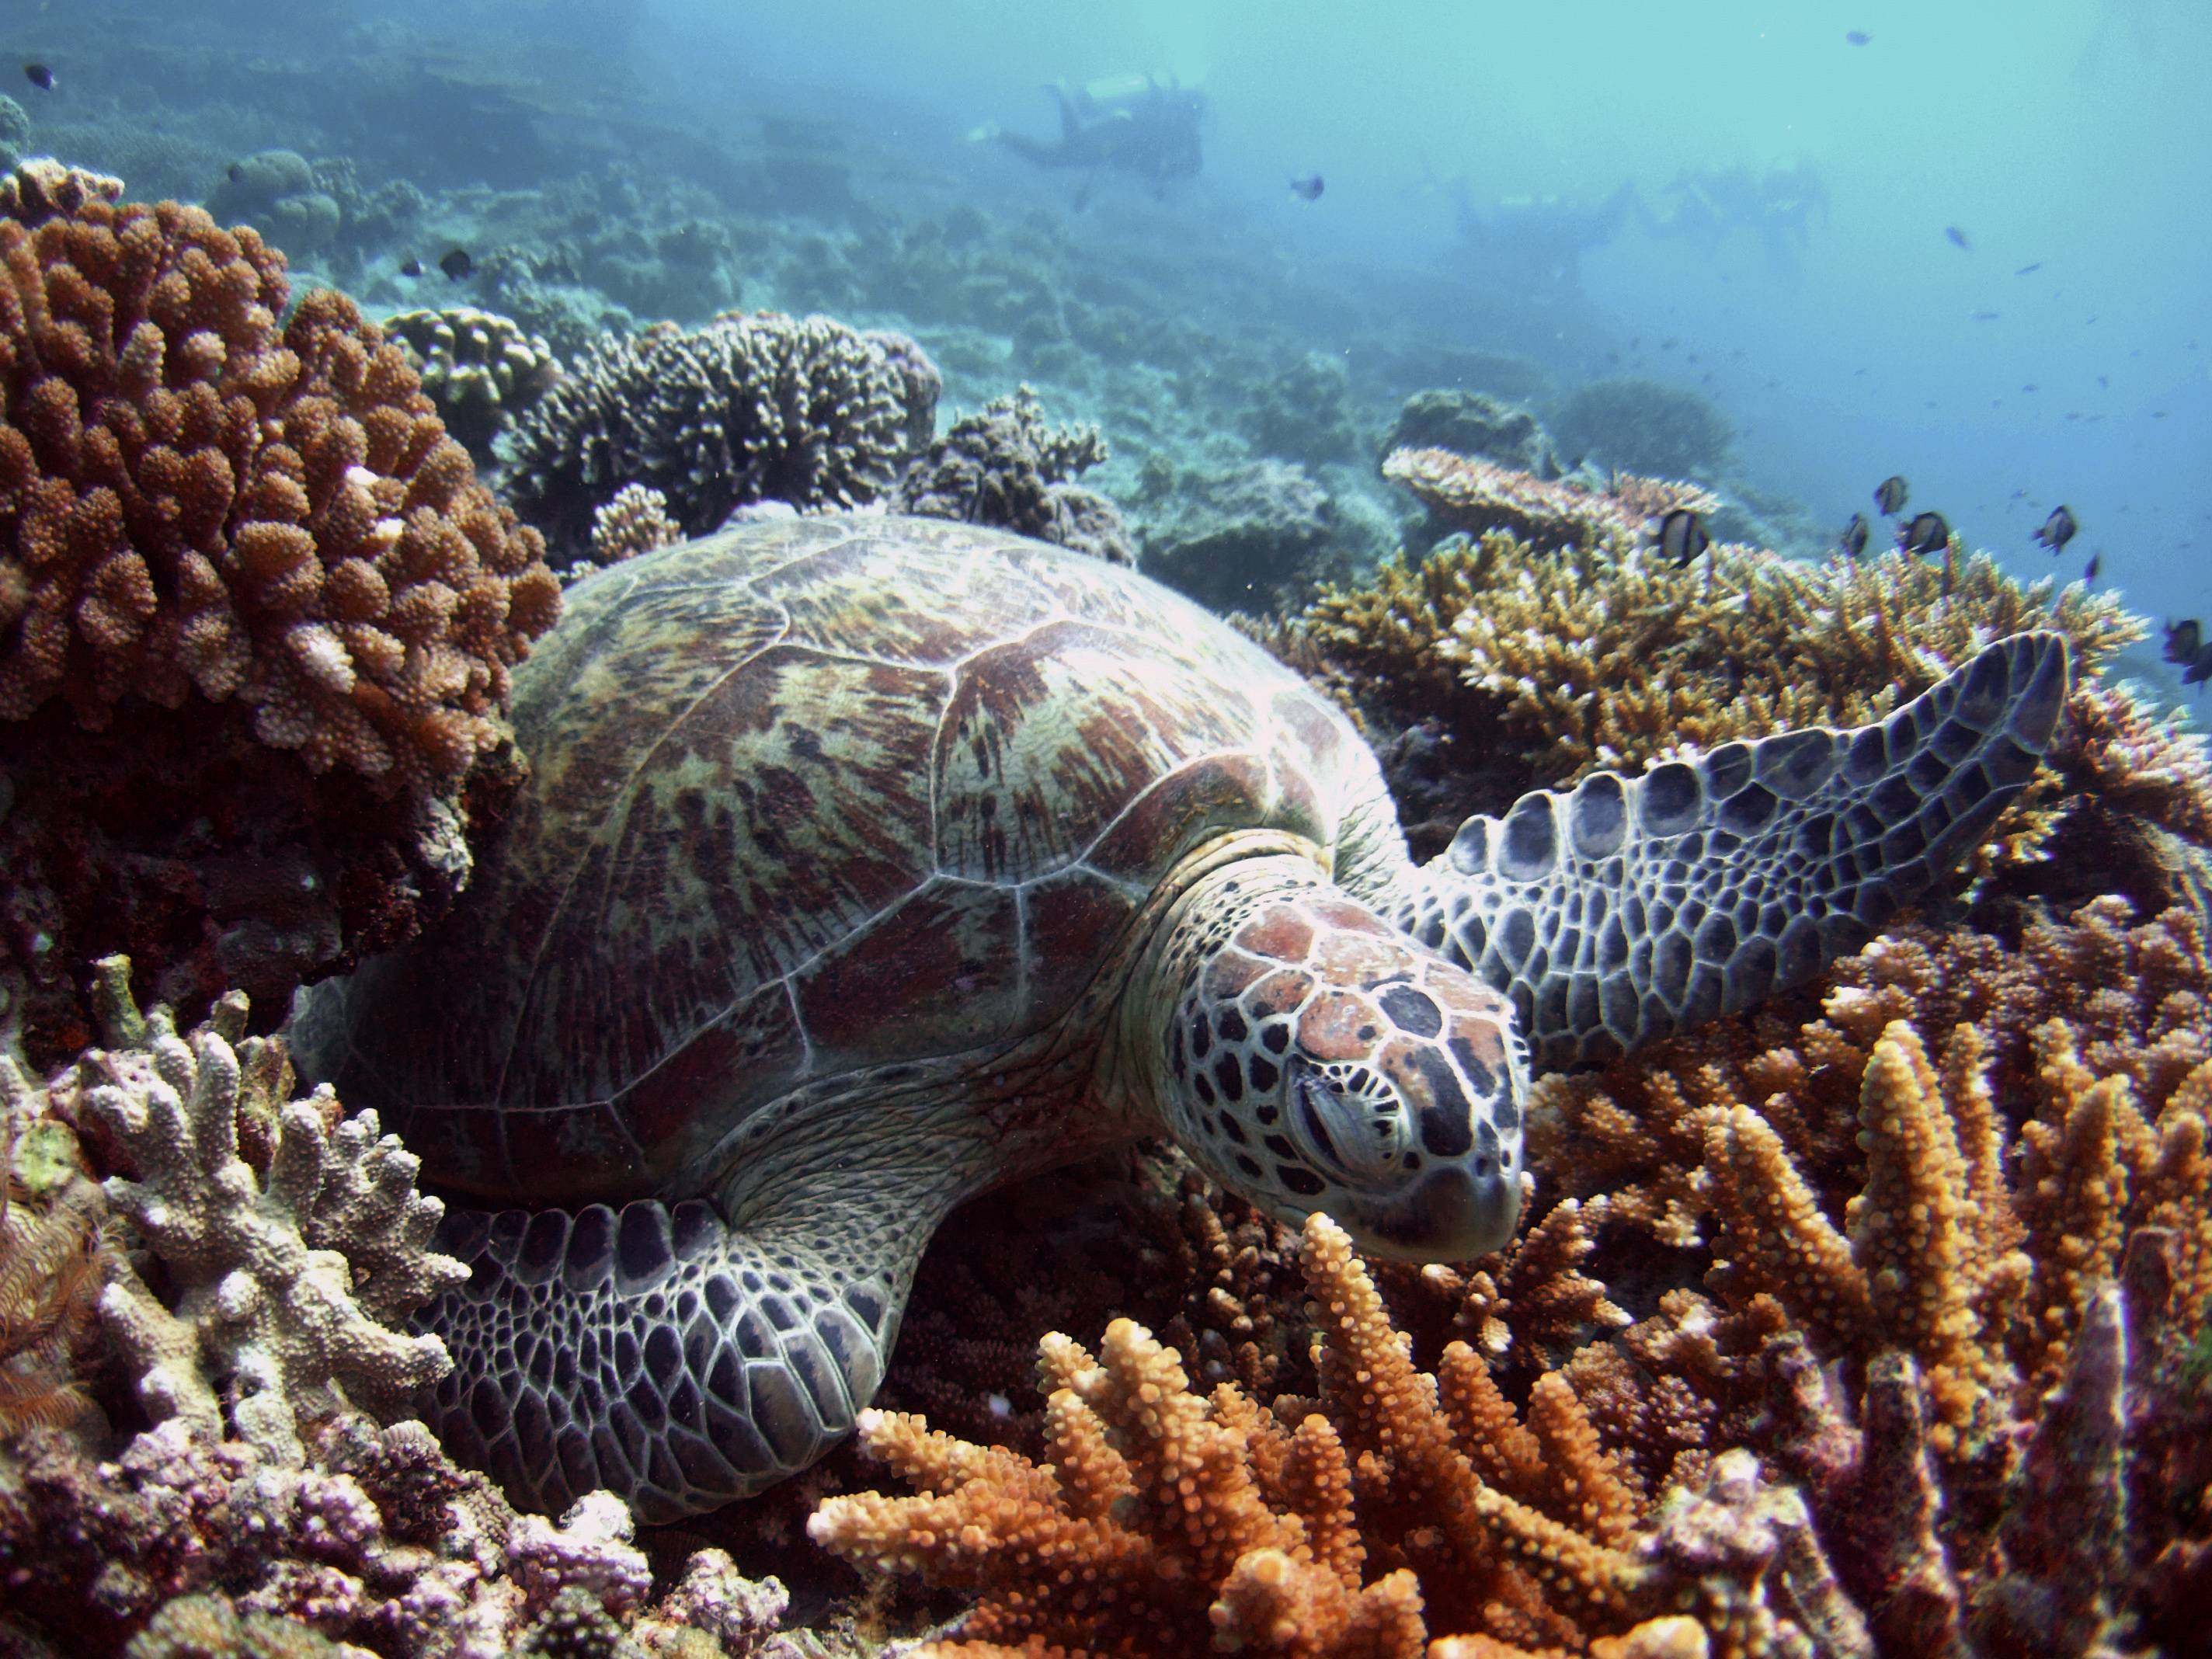 A green turtle lies on a bed of corals off Malaysia’s Sipadan Island in 2008. Photo: Reuters